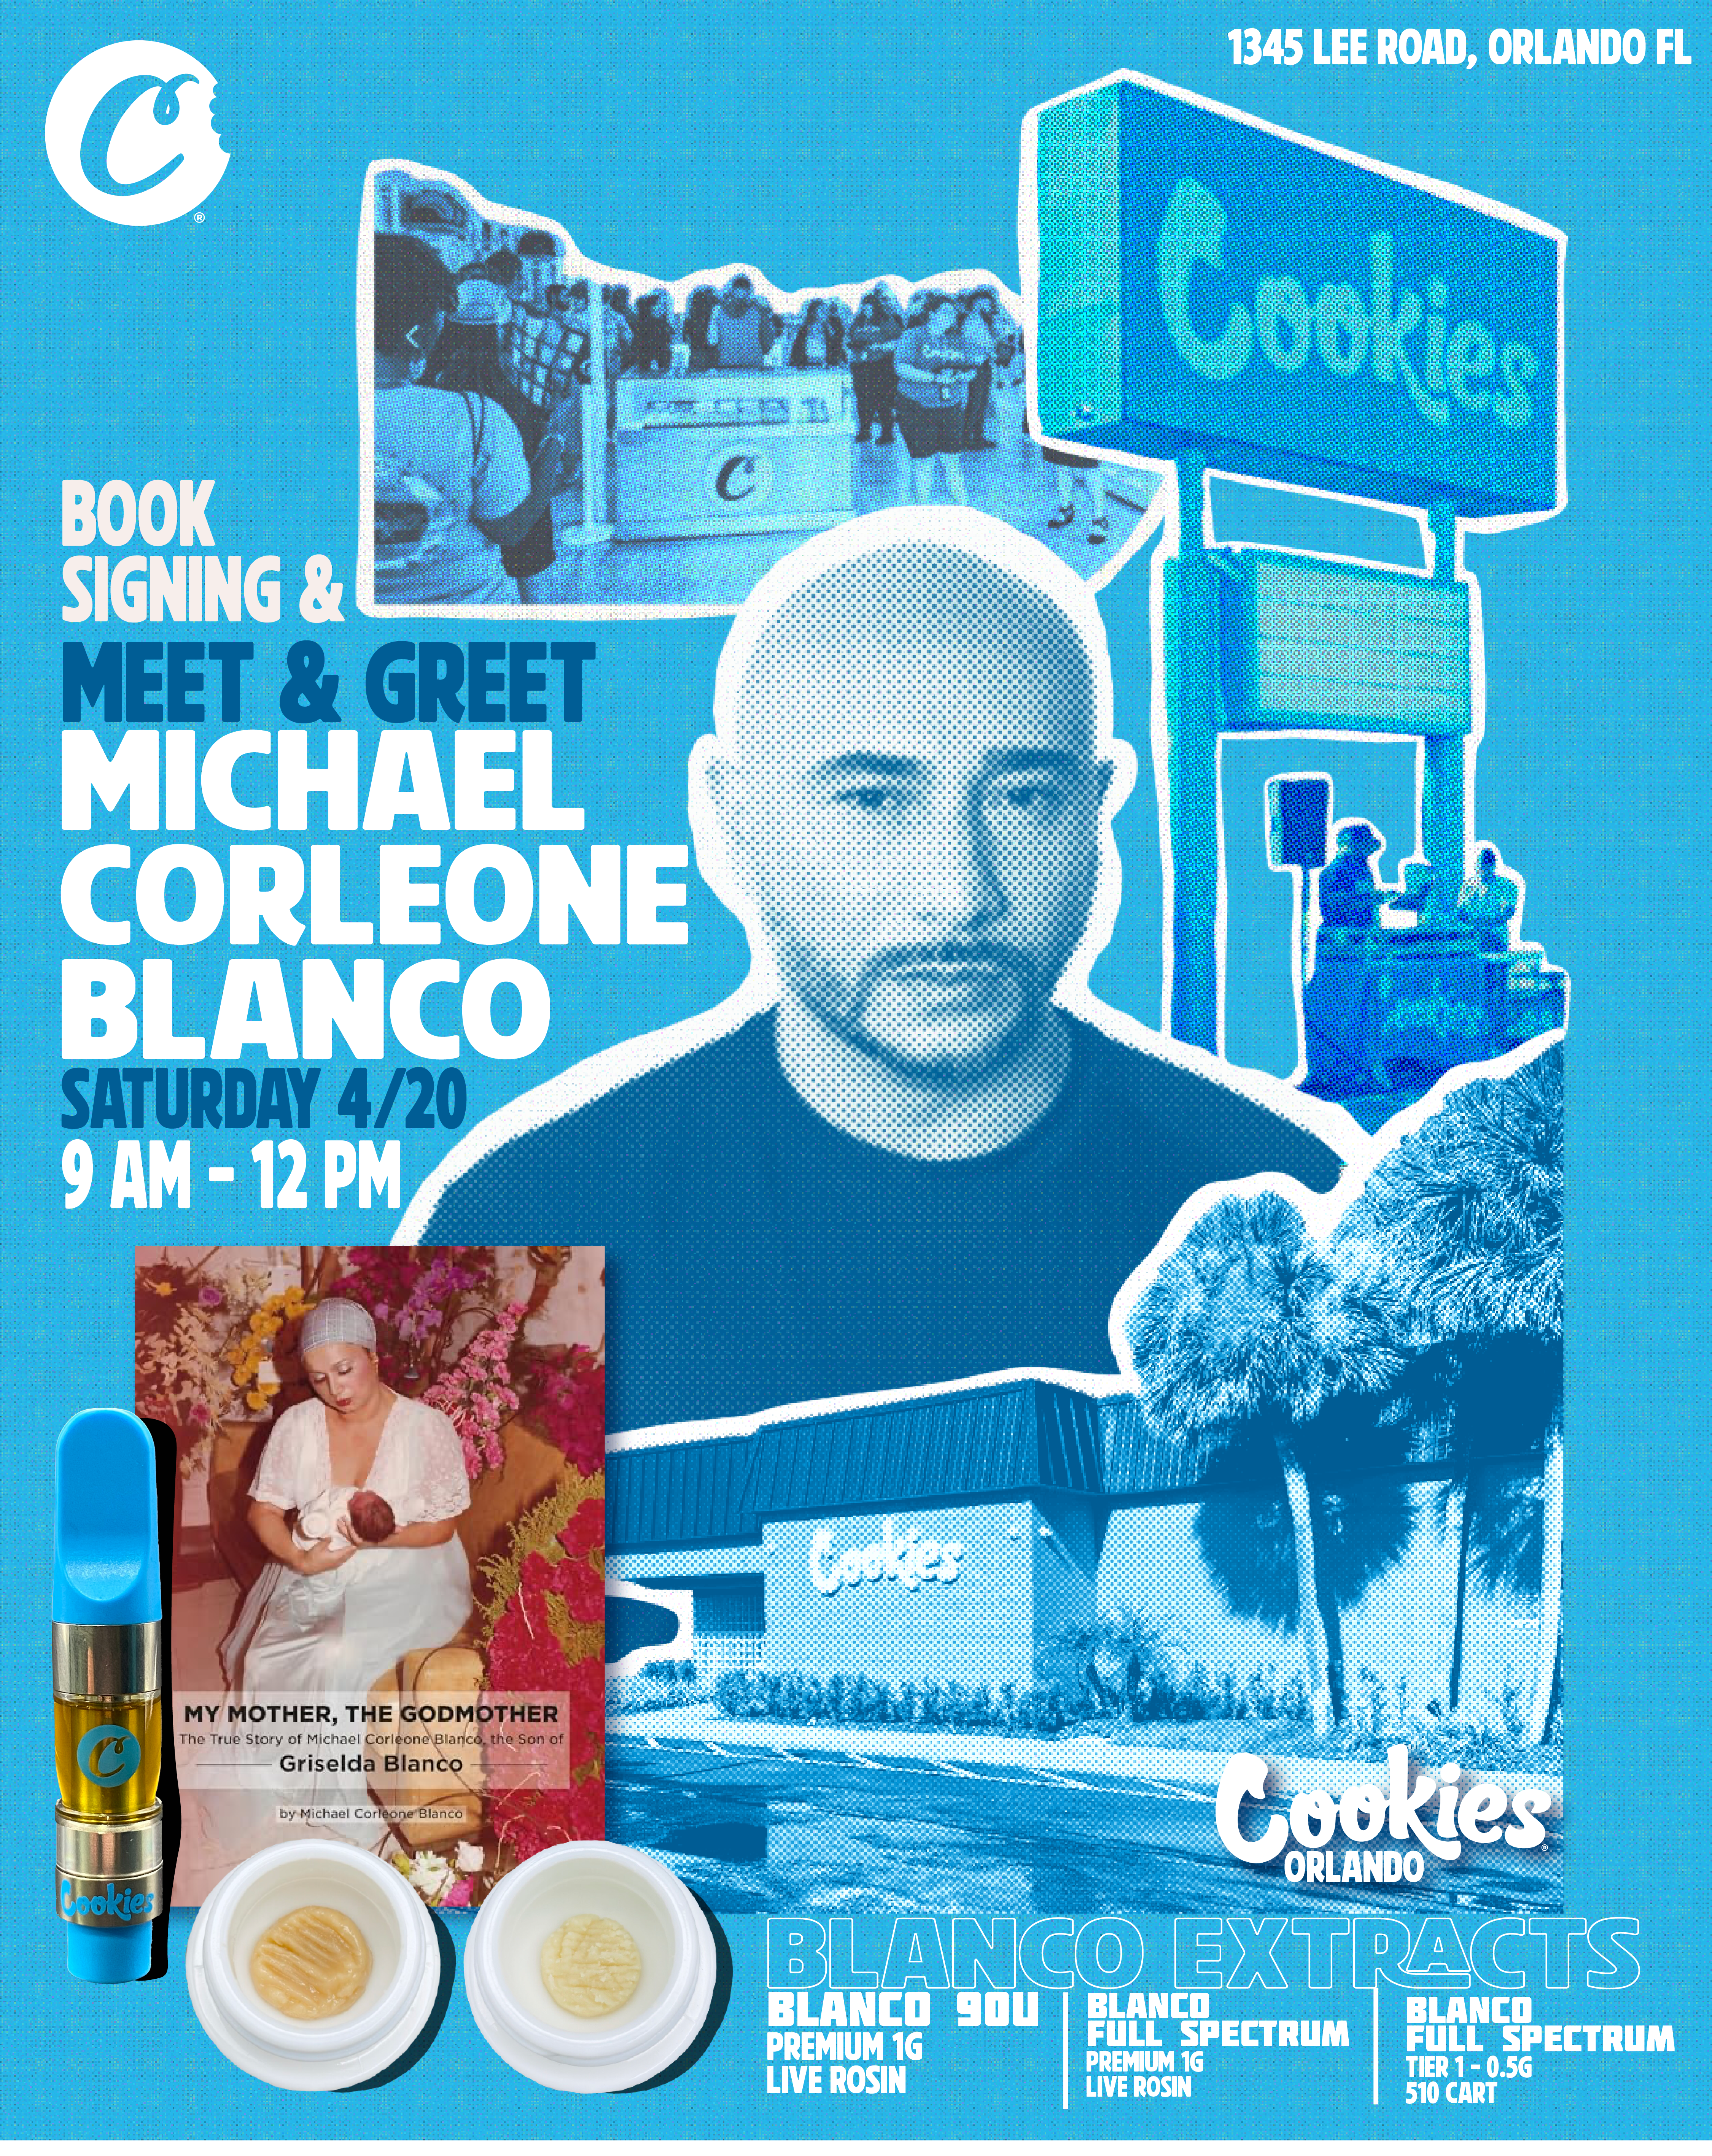 Cookies Michael Corleone Blanco Book Signing And Meet And Greet